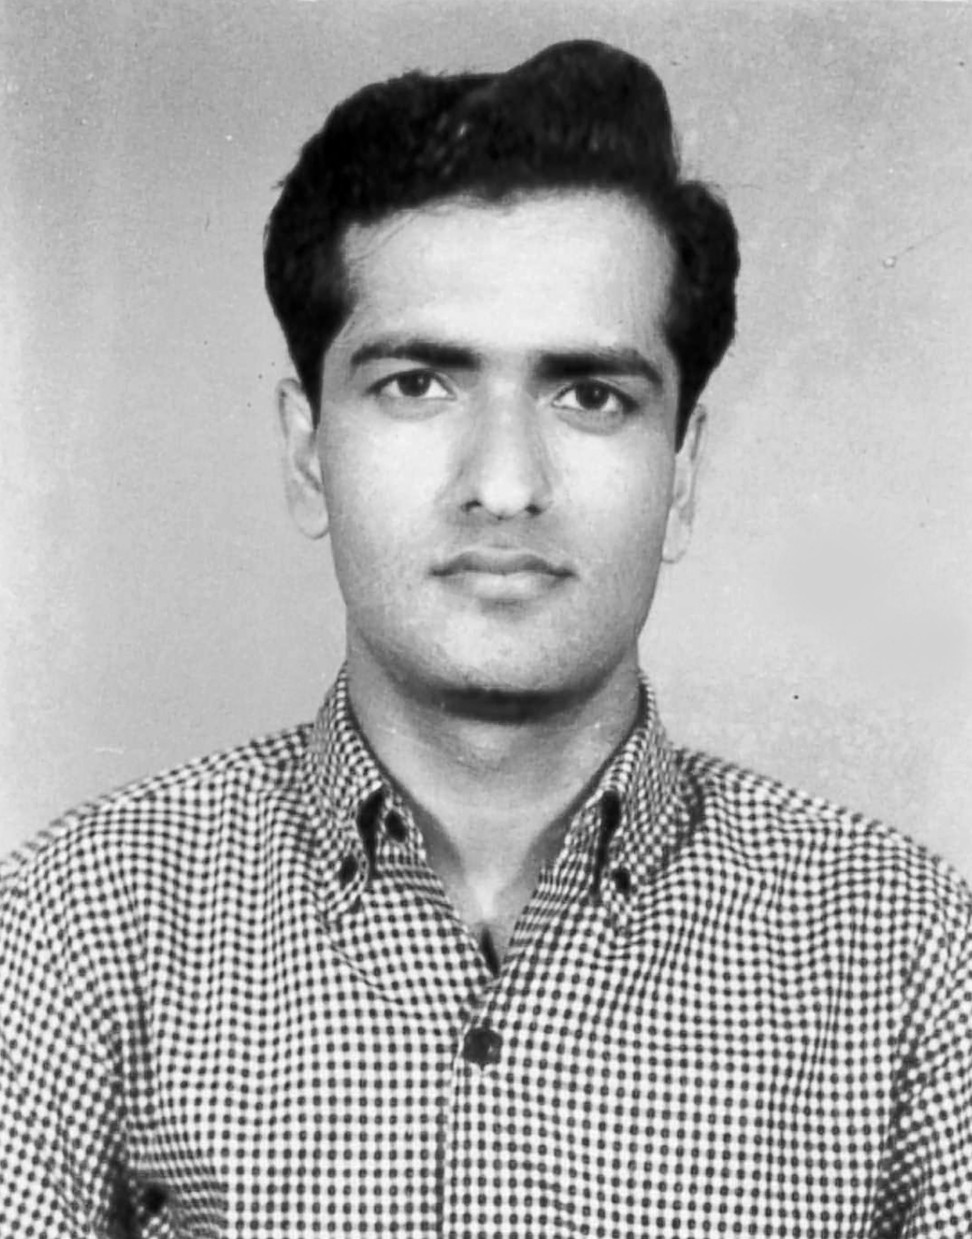 Tolani aged 22 in 1968.